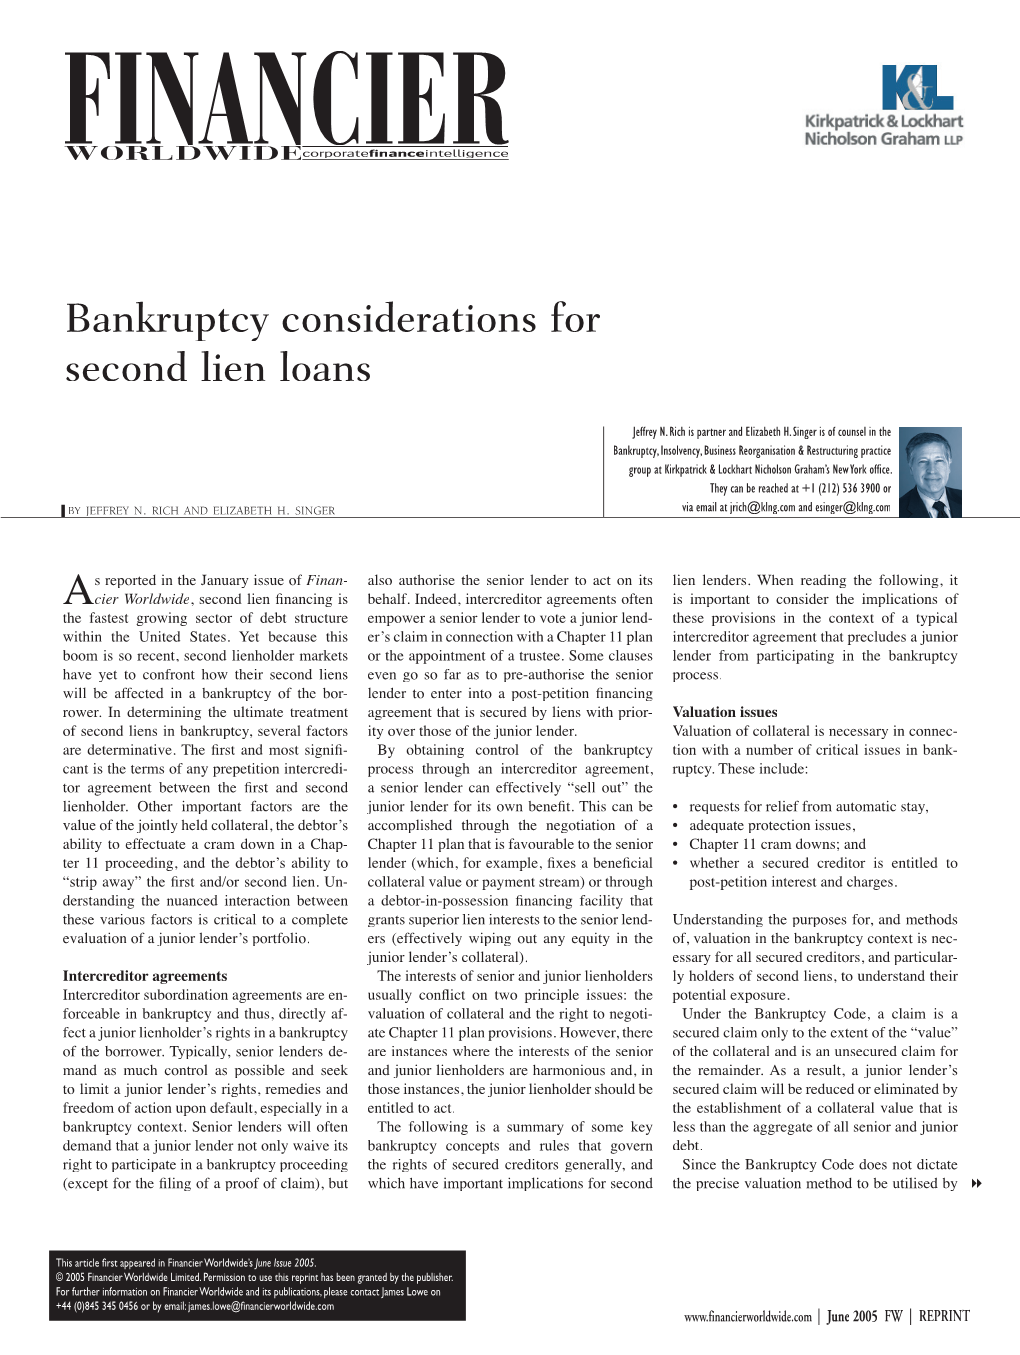 Bankruptcy Considerations for Second Lien Loans